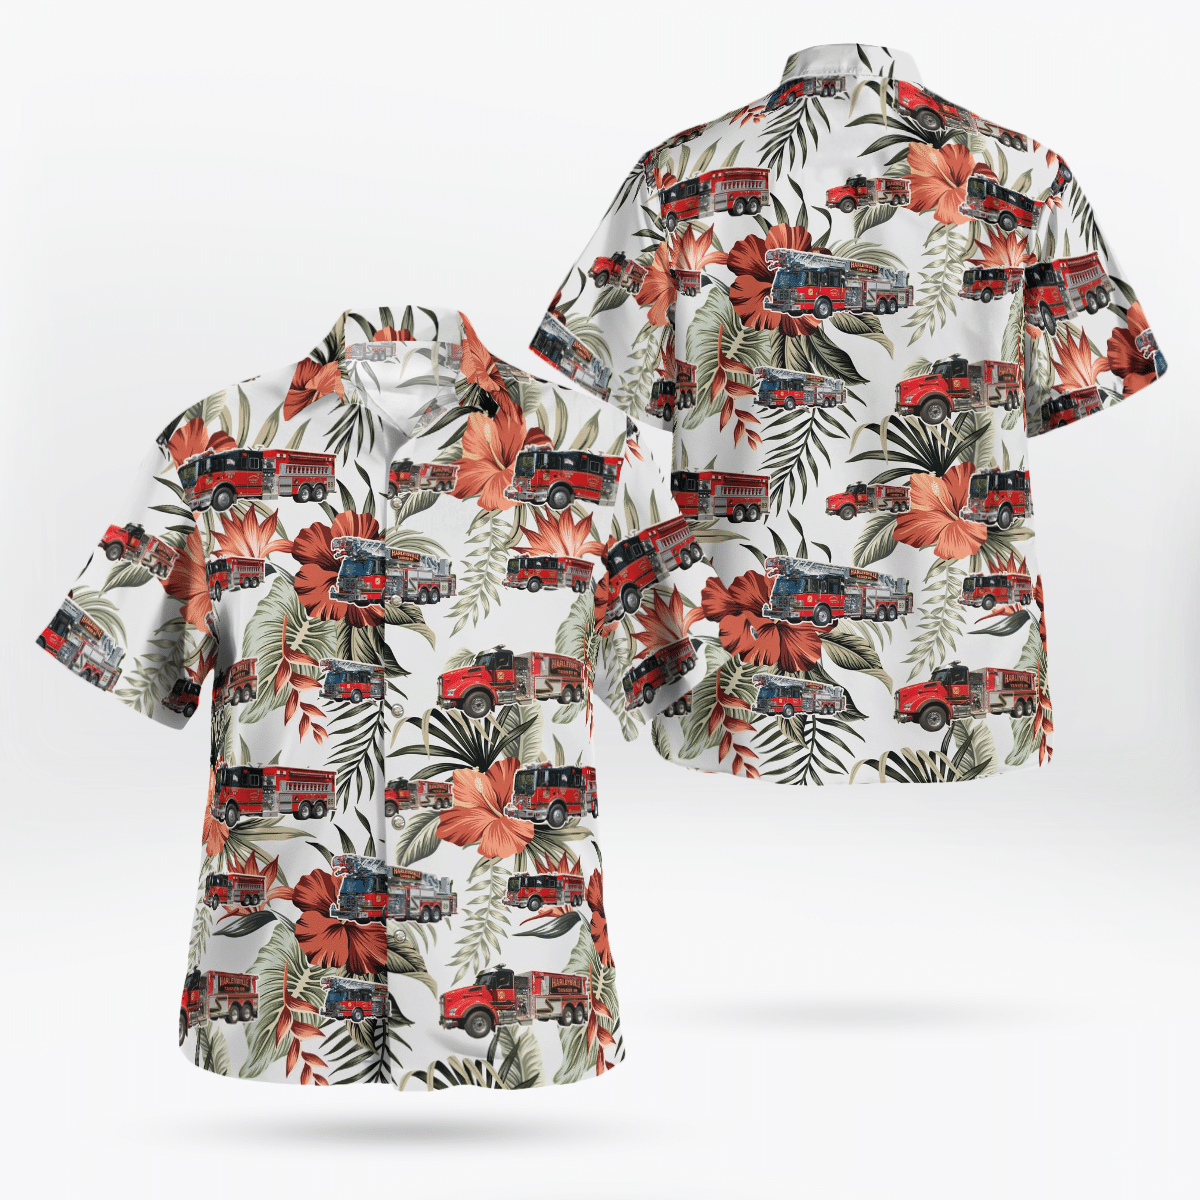 If you are in need of a new summertime look, pick up this Hawaiian shirt 114